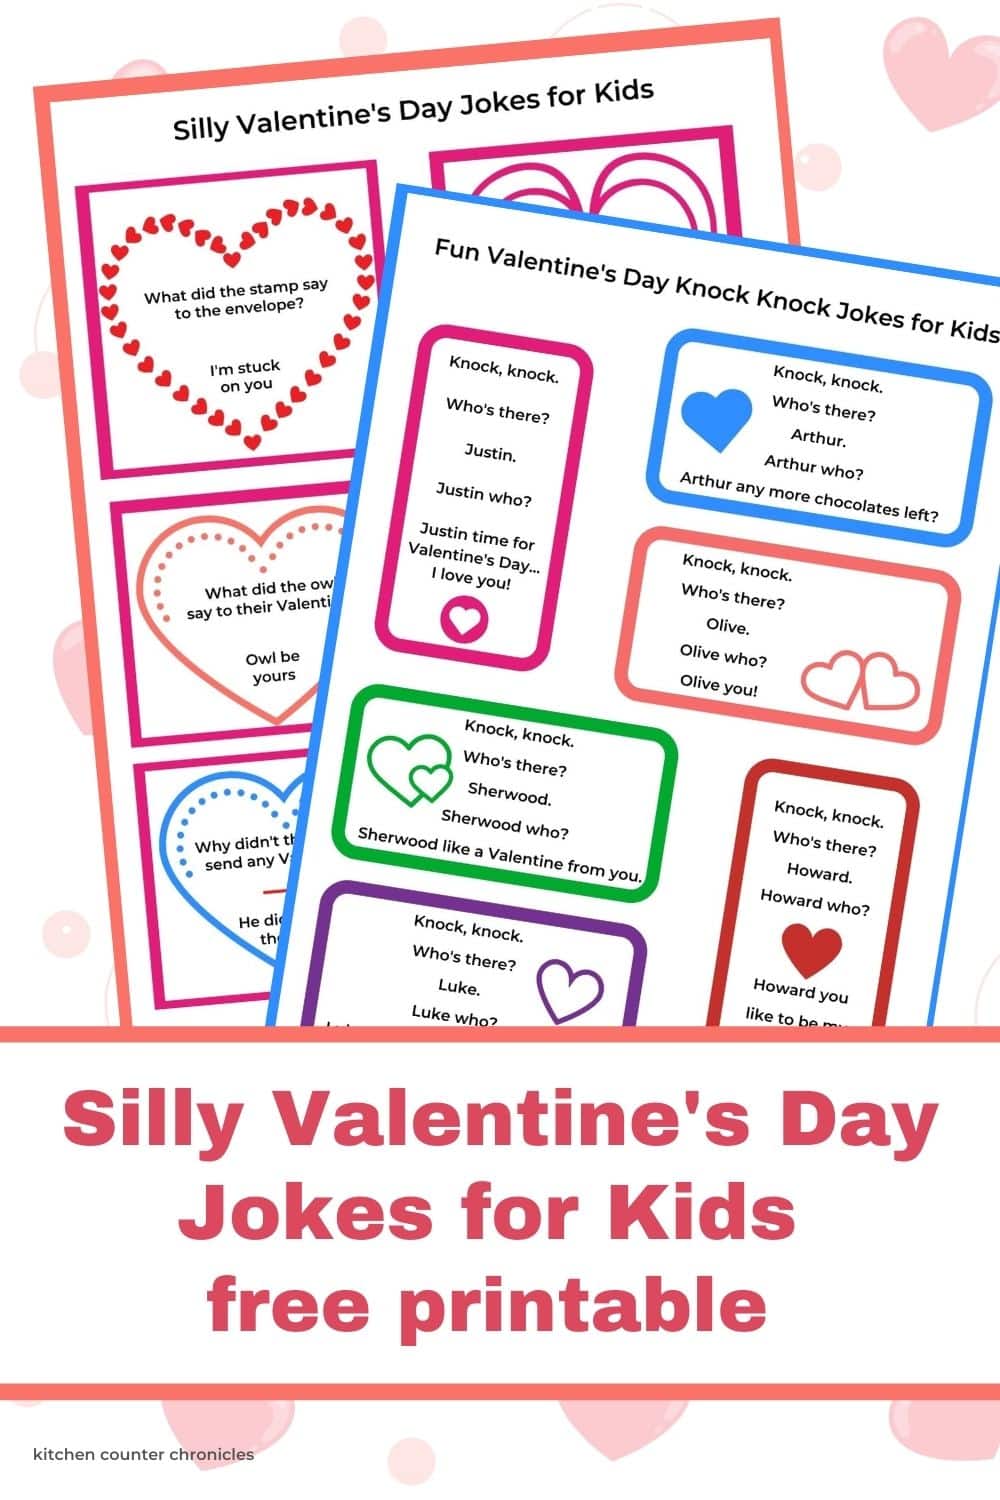 Silly Valentine's Day jokes for kids free printable with title